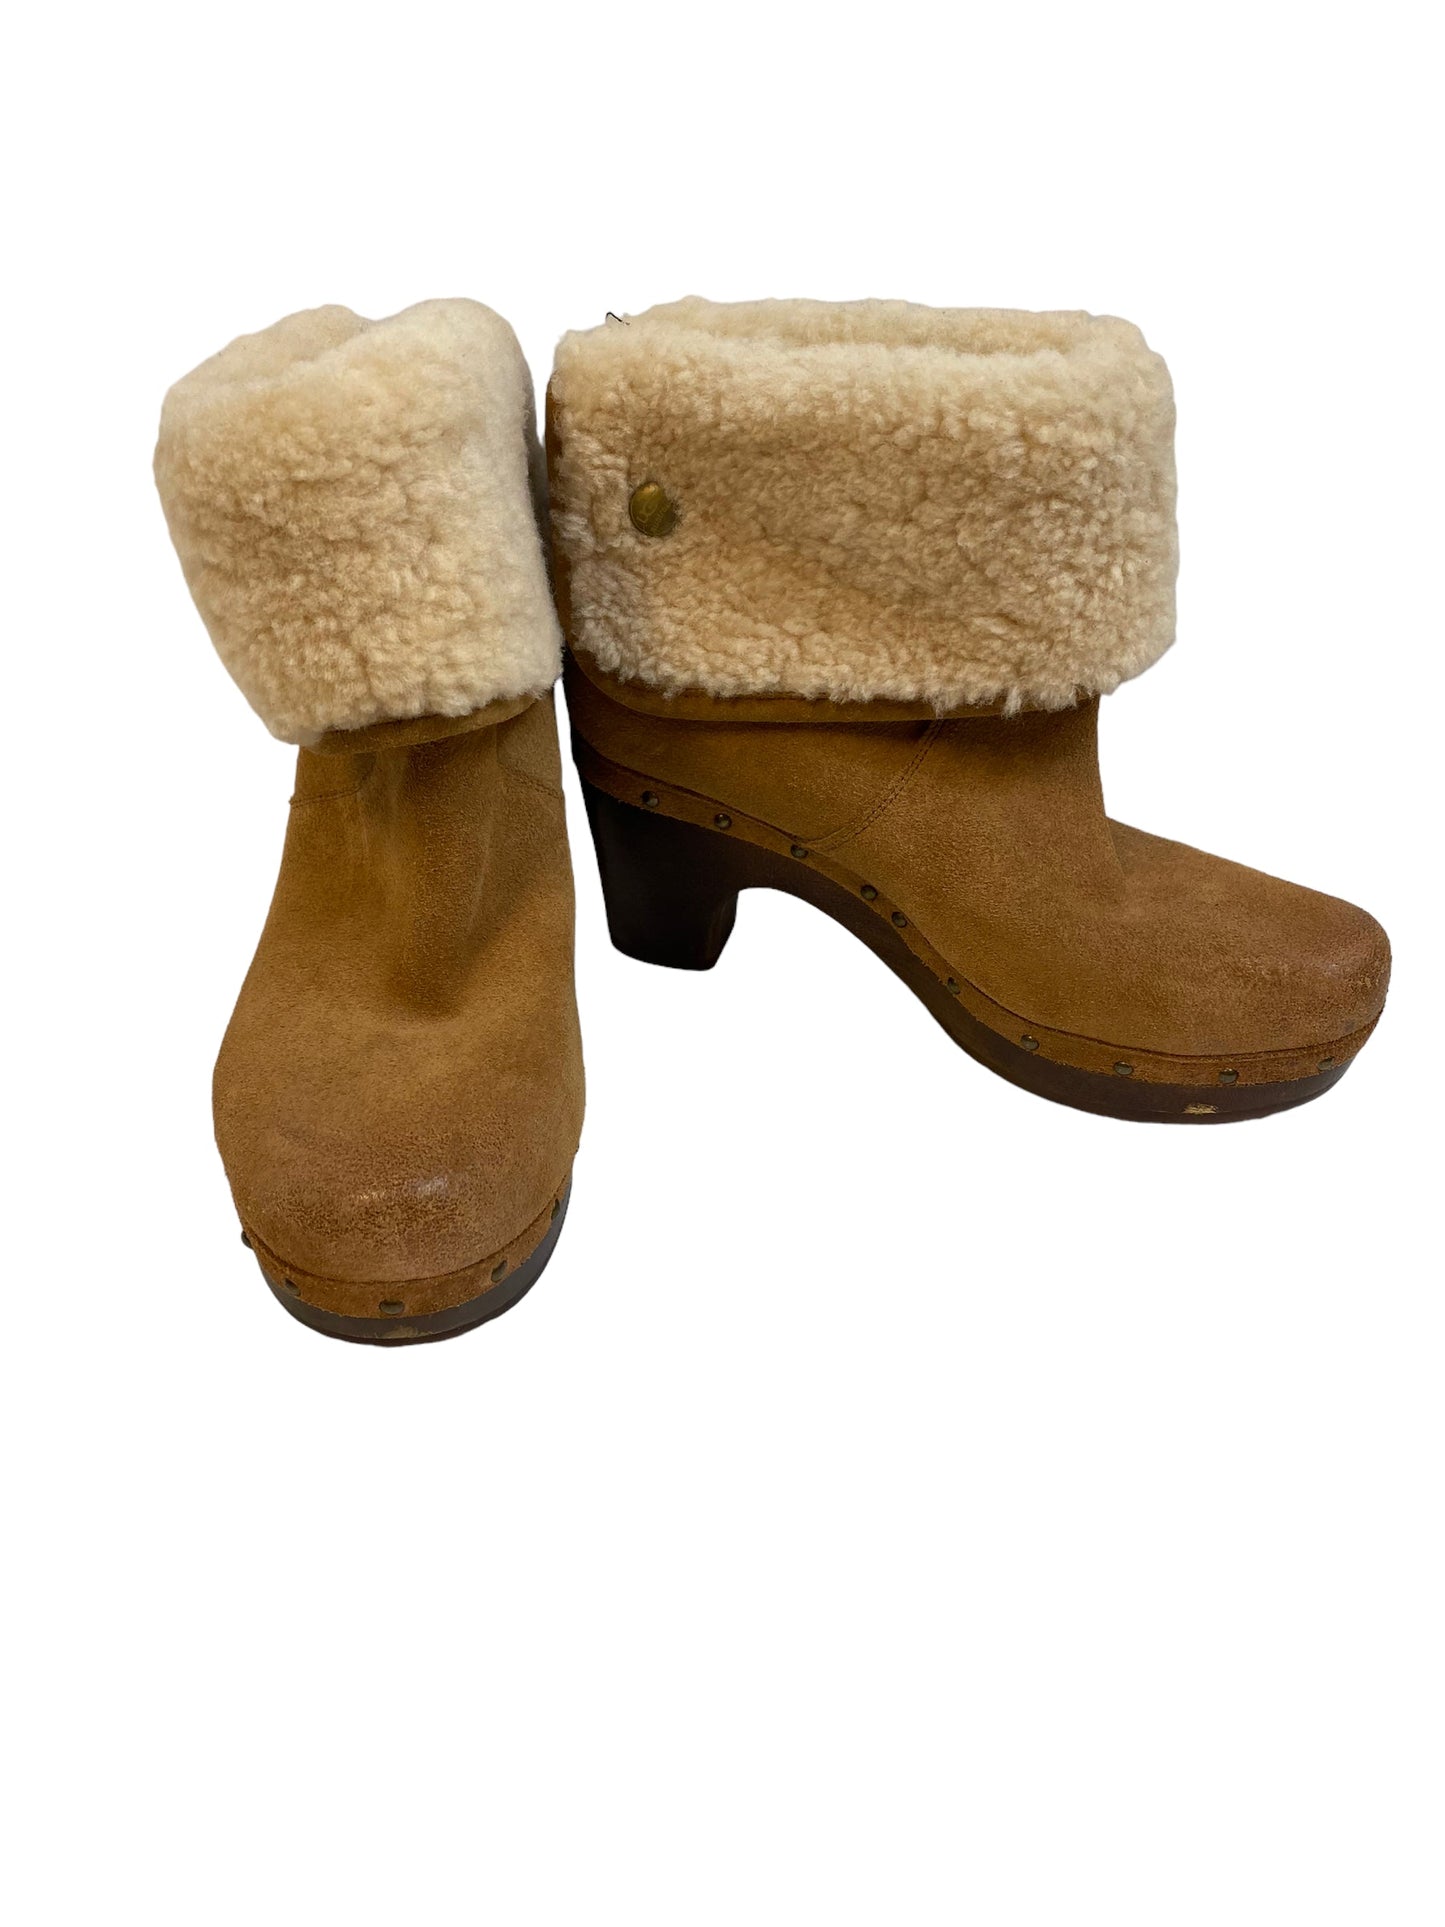 Boots Ankle Heels By Ugg  Size: 6